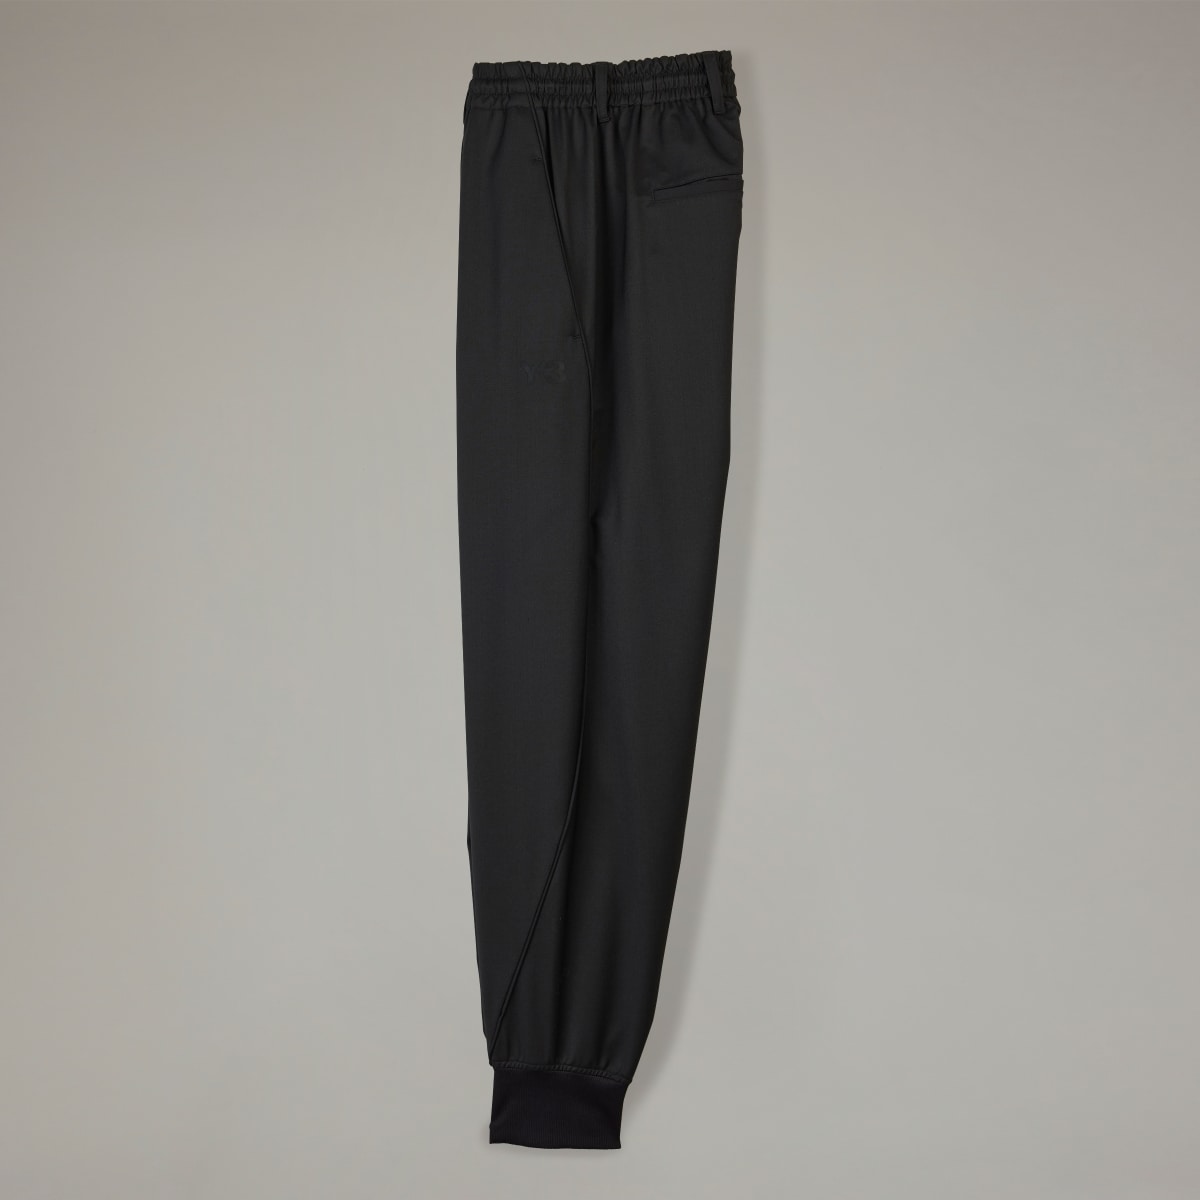 Adidas Y-3 Refined Woven Cuffed Tracksuit Bottoms. 5